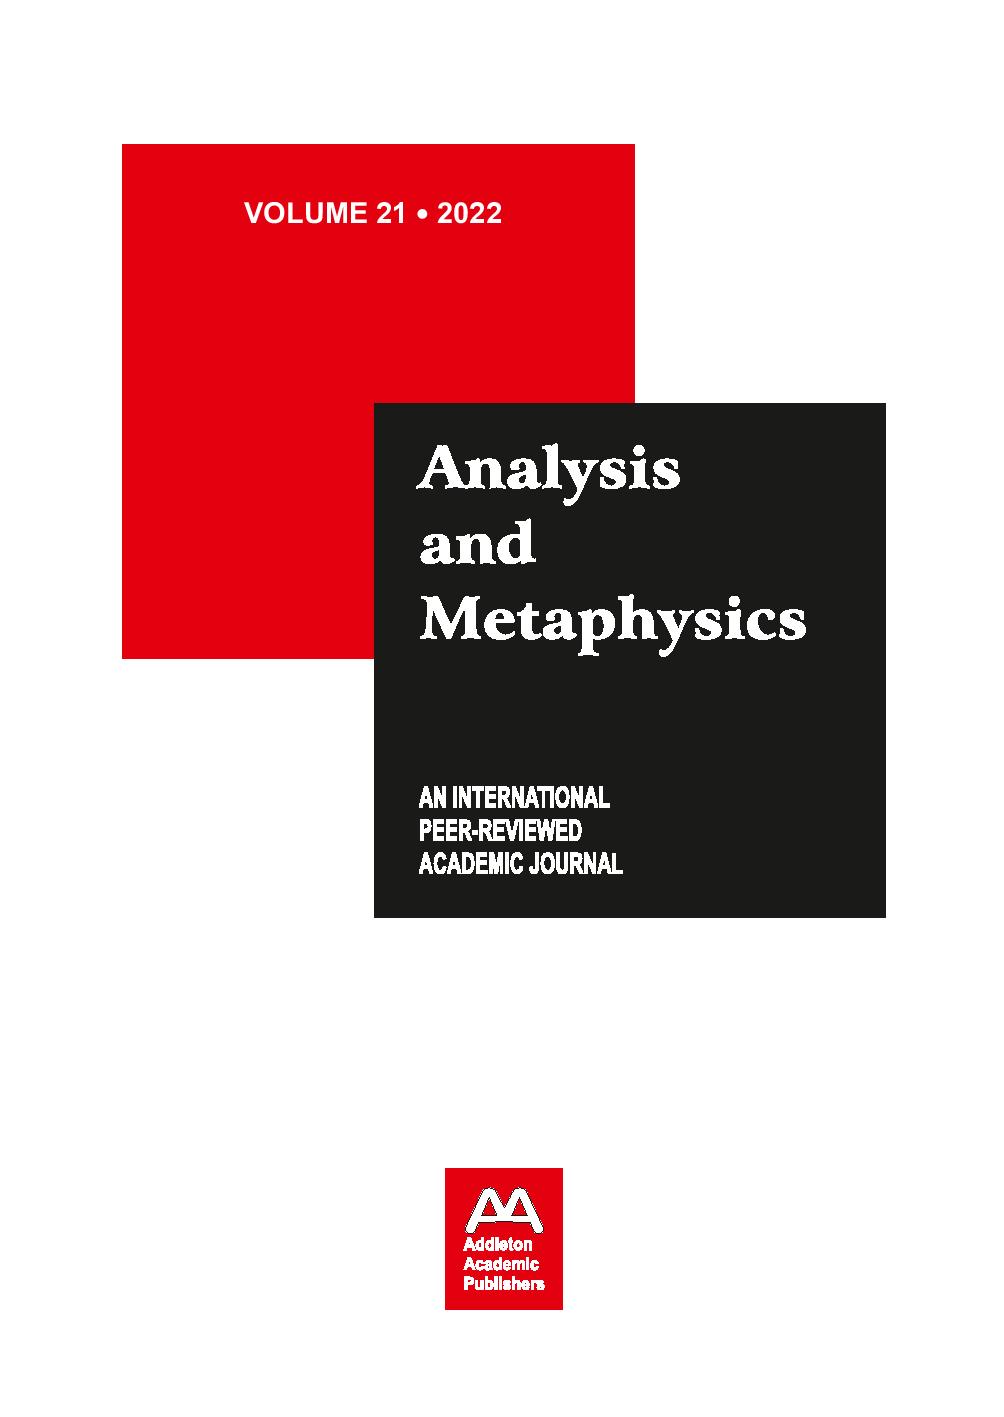 Ambient Sound Recognition and Processing Tools, Object Perception and Motion Control Algorithms, and Behavioral Predictive Analytics in the Virtual Economy of the Metaverse Cover Image